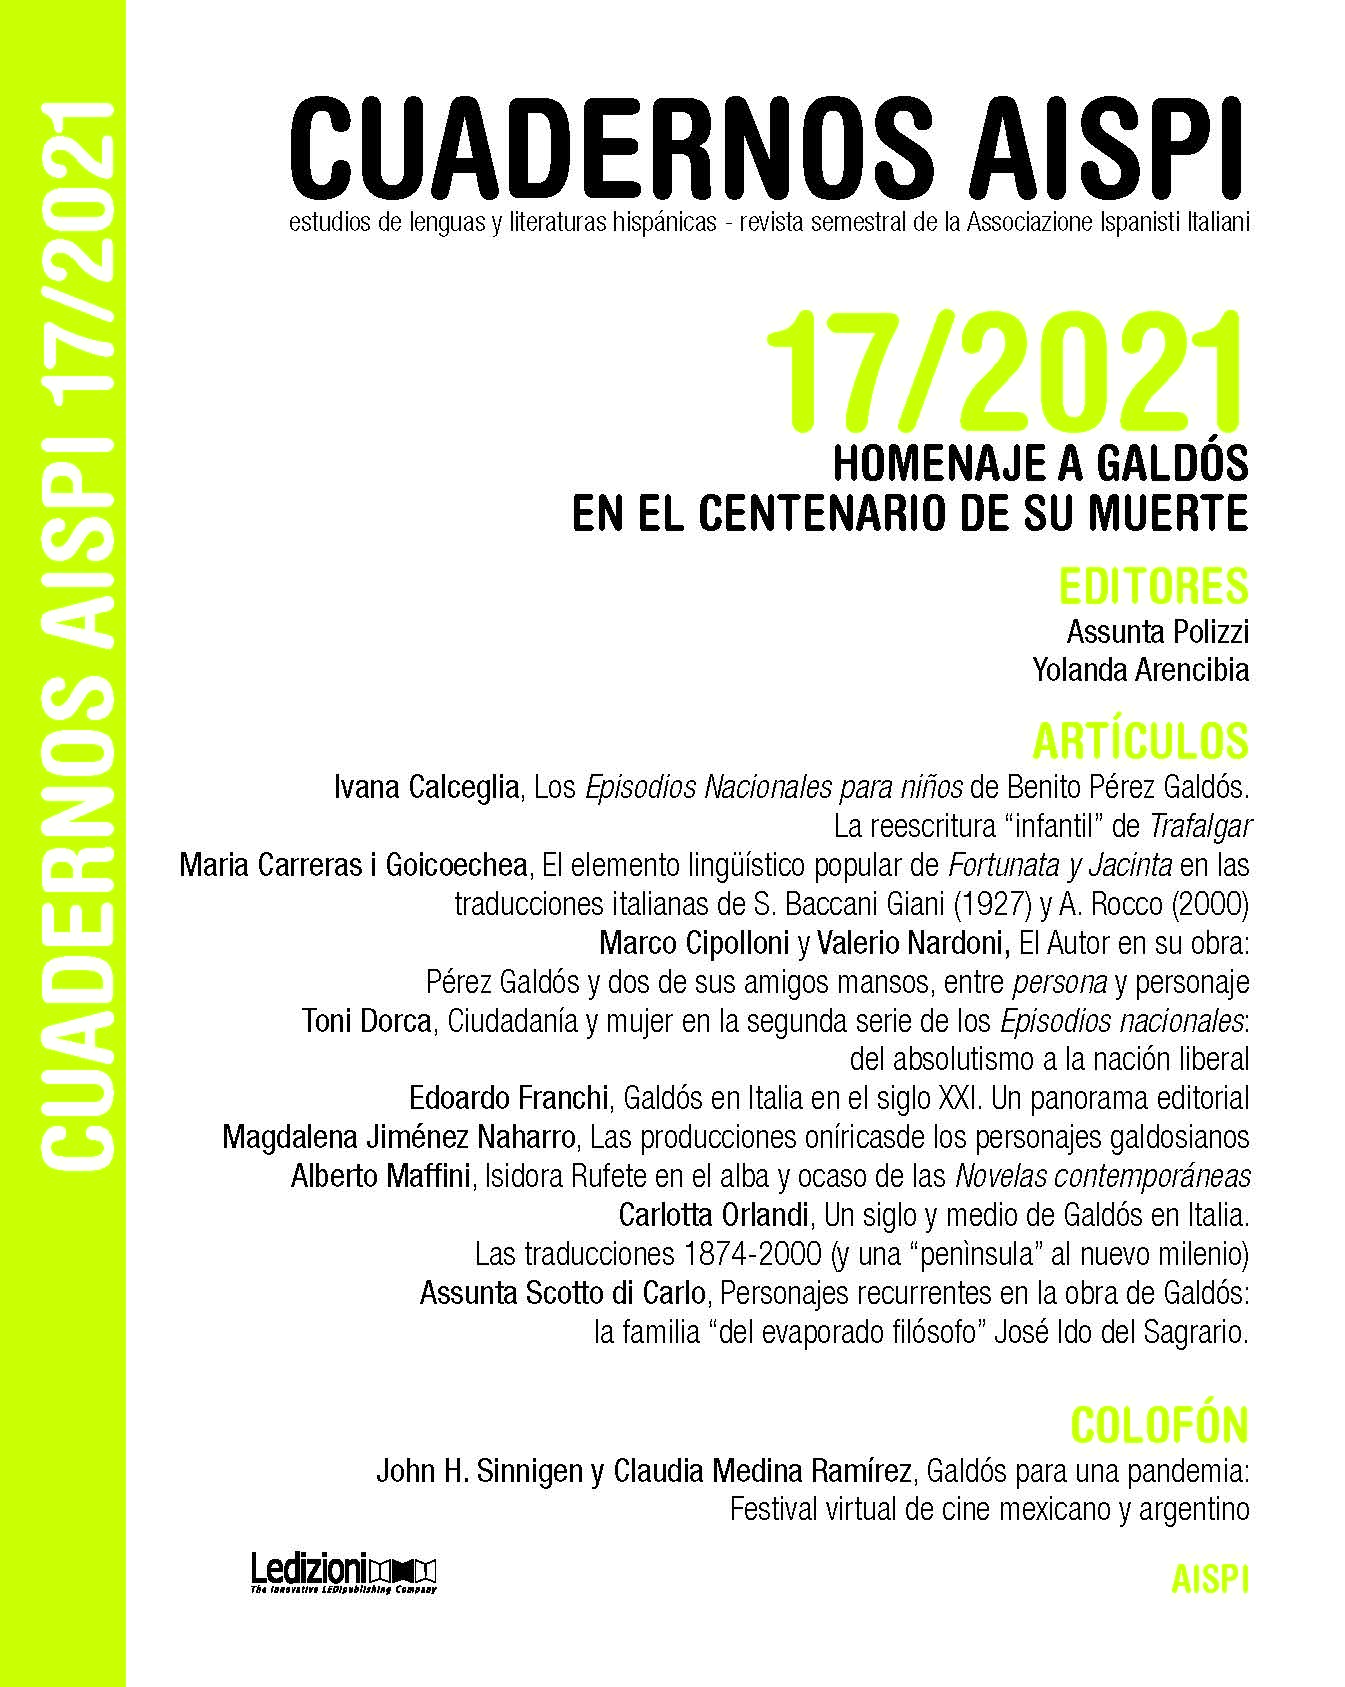 					View Vol. 17 No. 1 (2021): Homage to Galdós on the centenary of his death
				